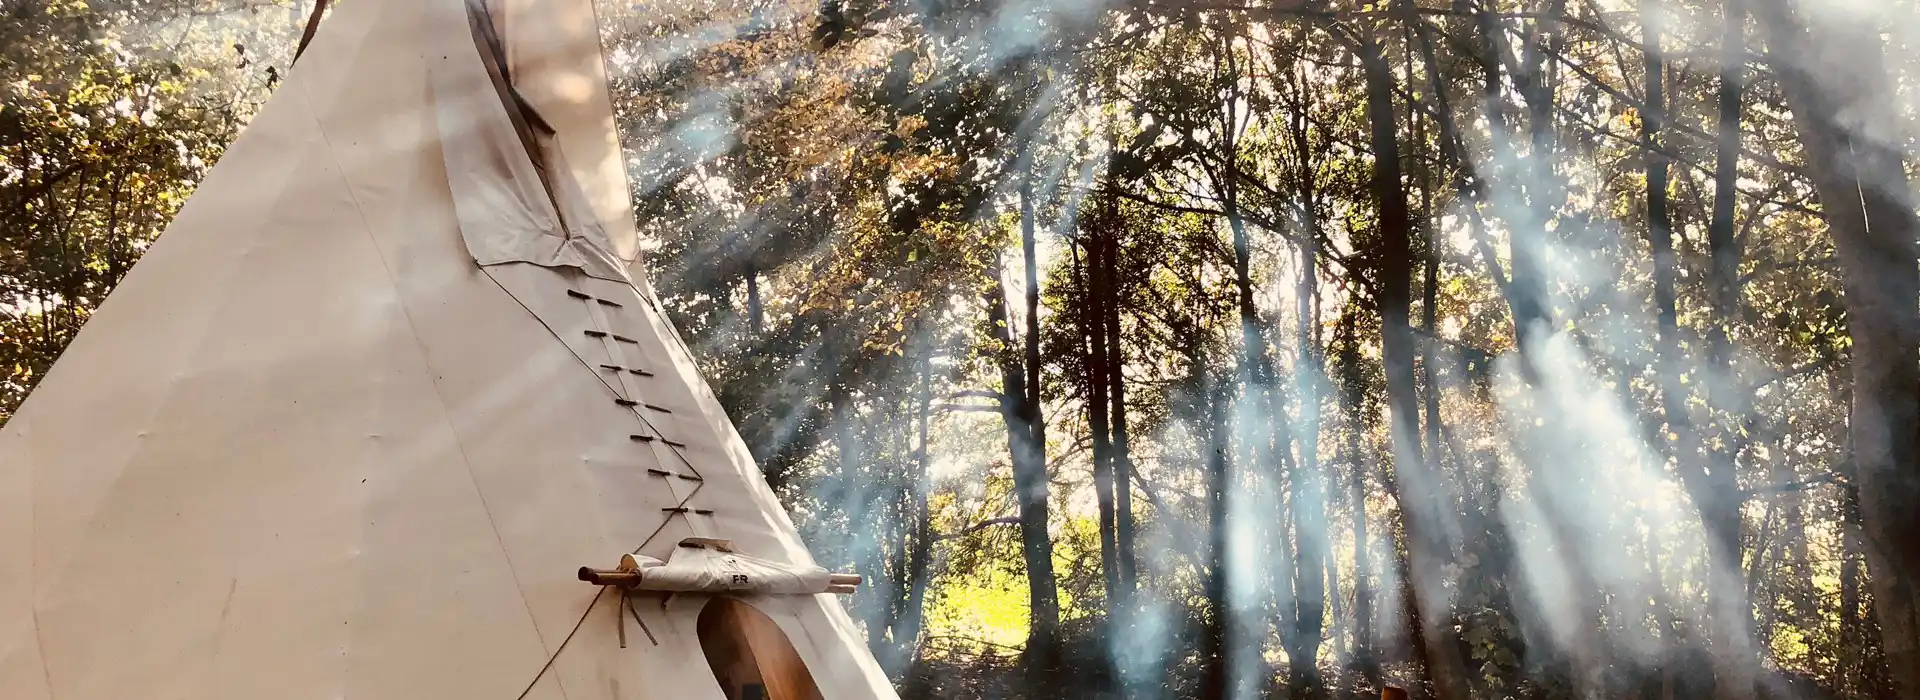 Tipi and wigwam holidays in Scotland